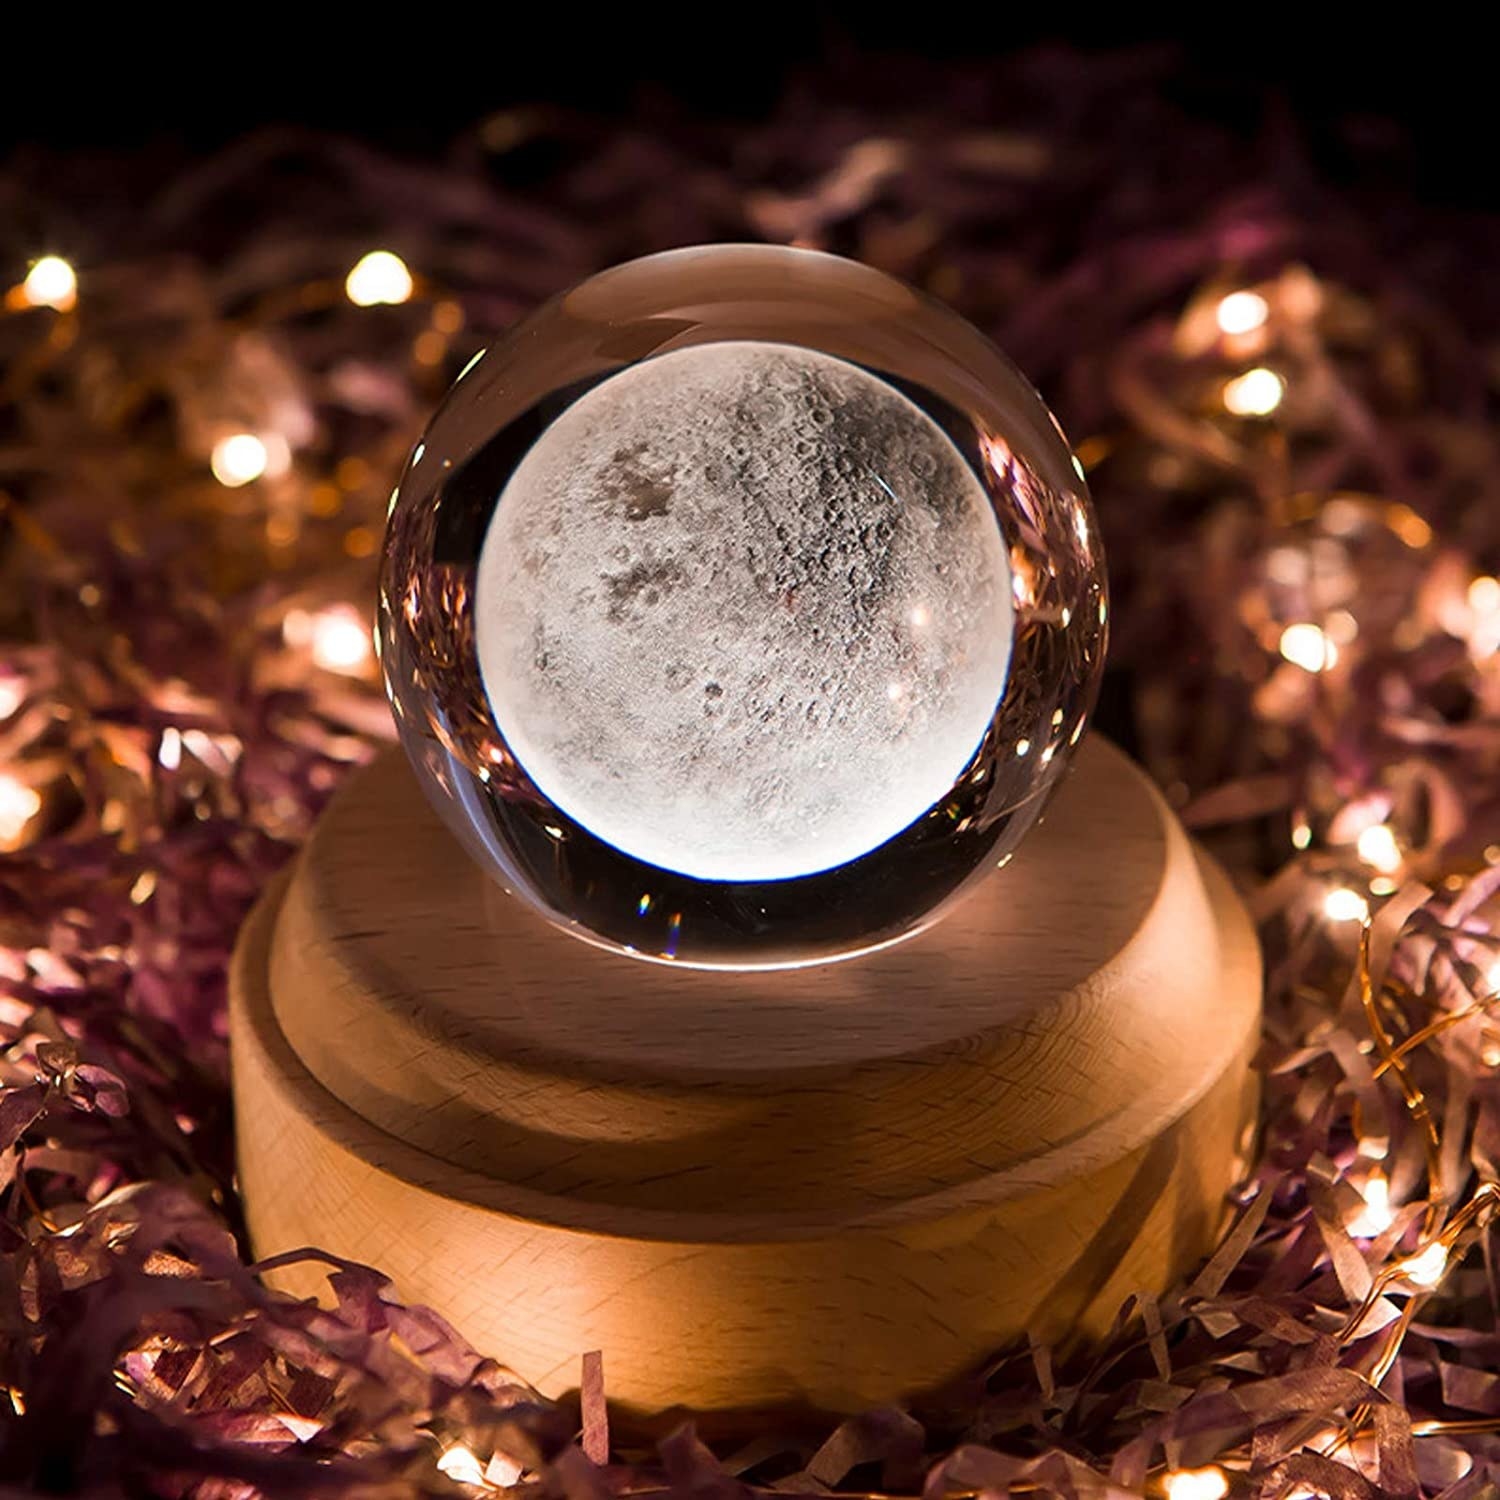 the crystal ball with a moon design inside, on a wooden pedestal